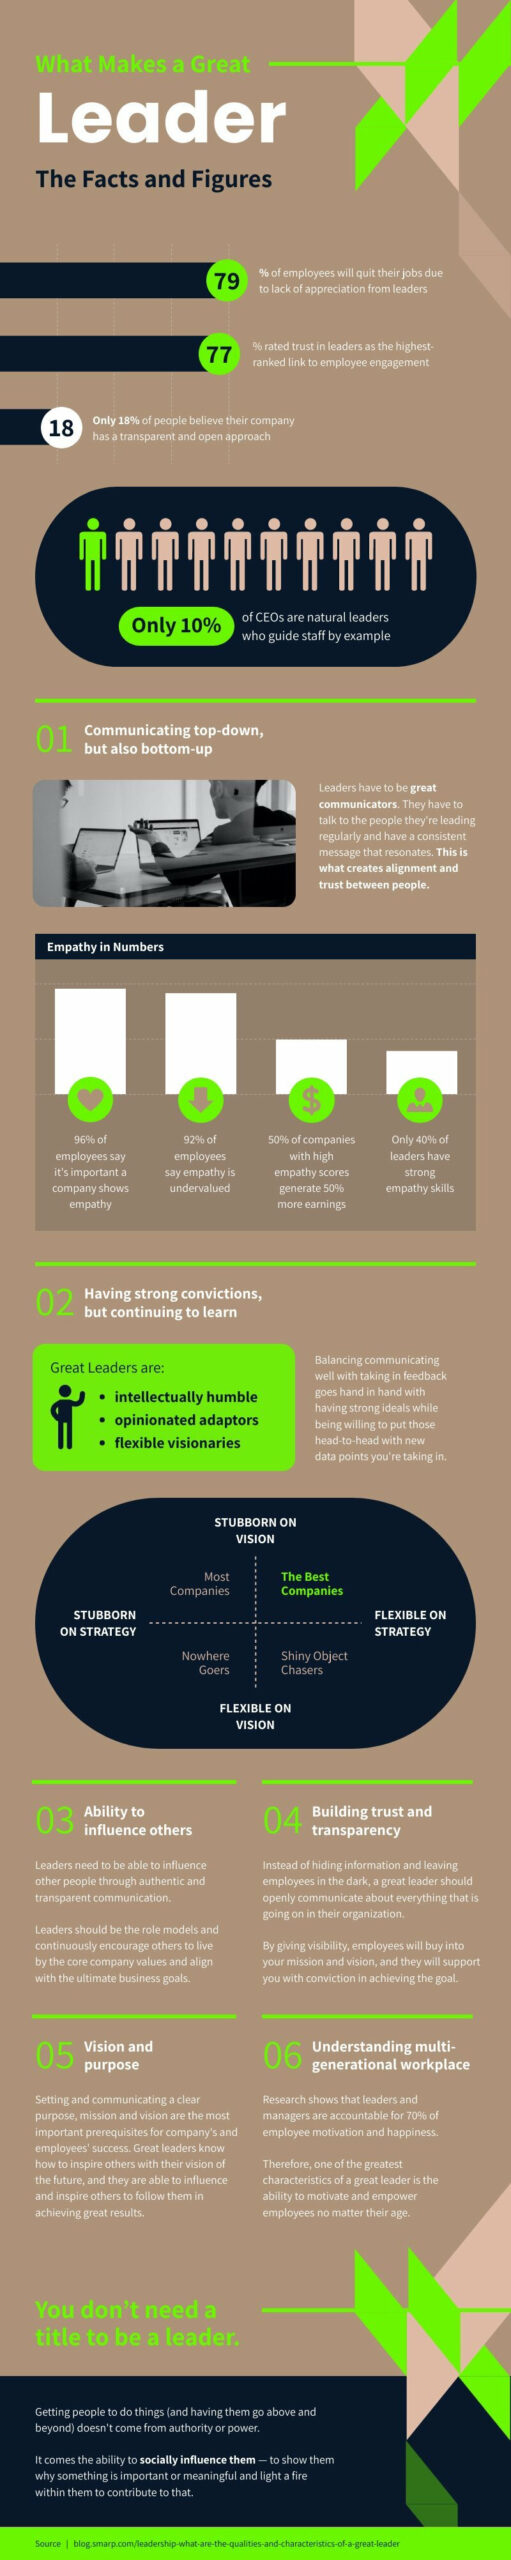 statistic infographics about what makes an effective leader